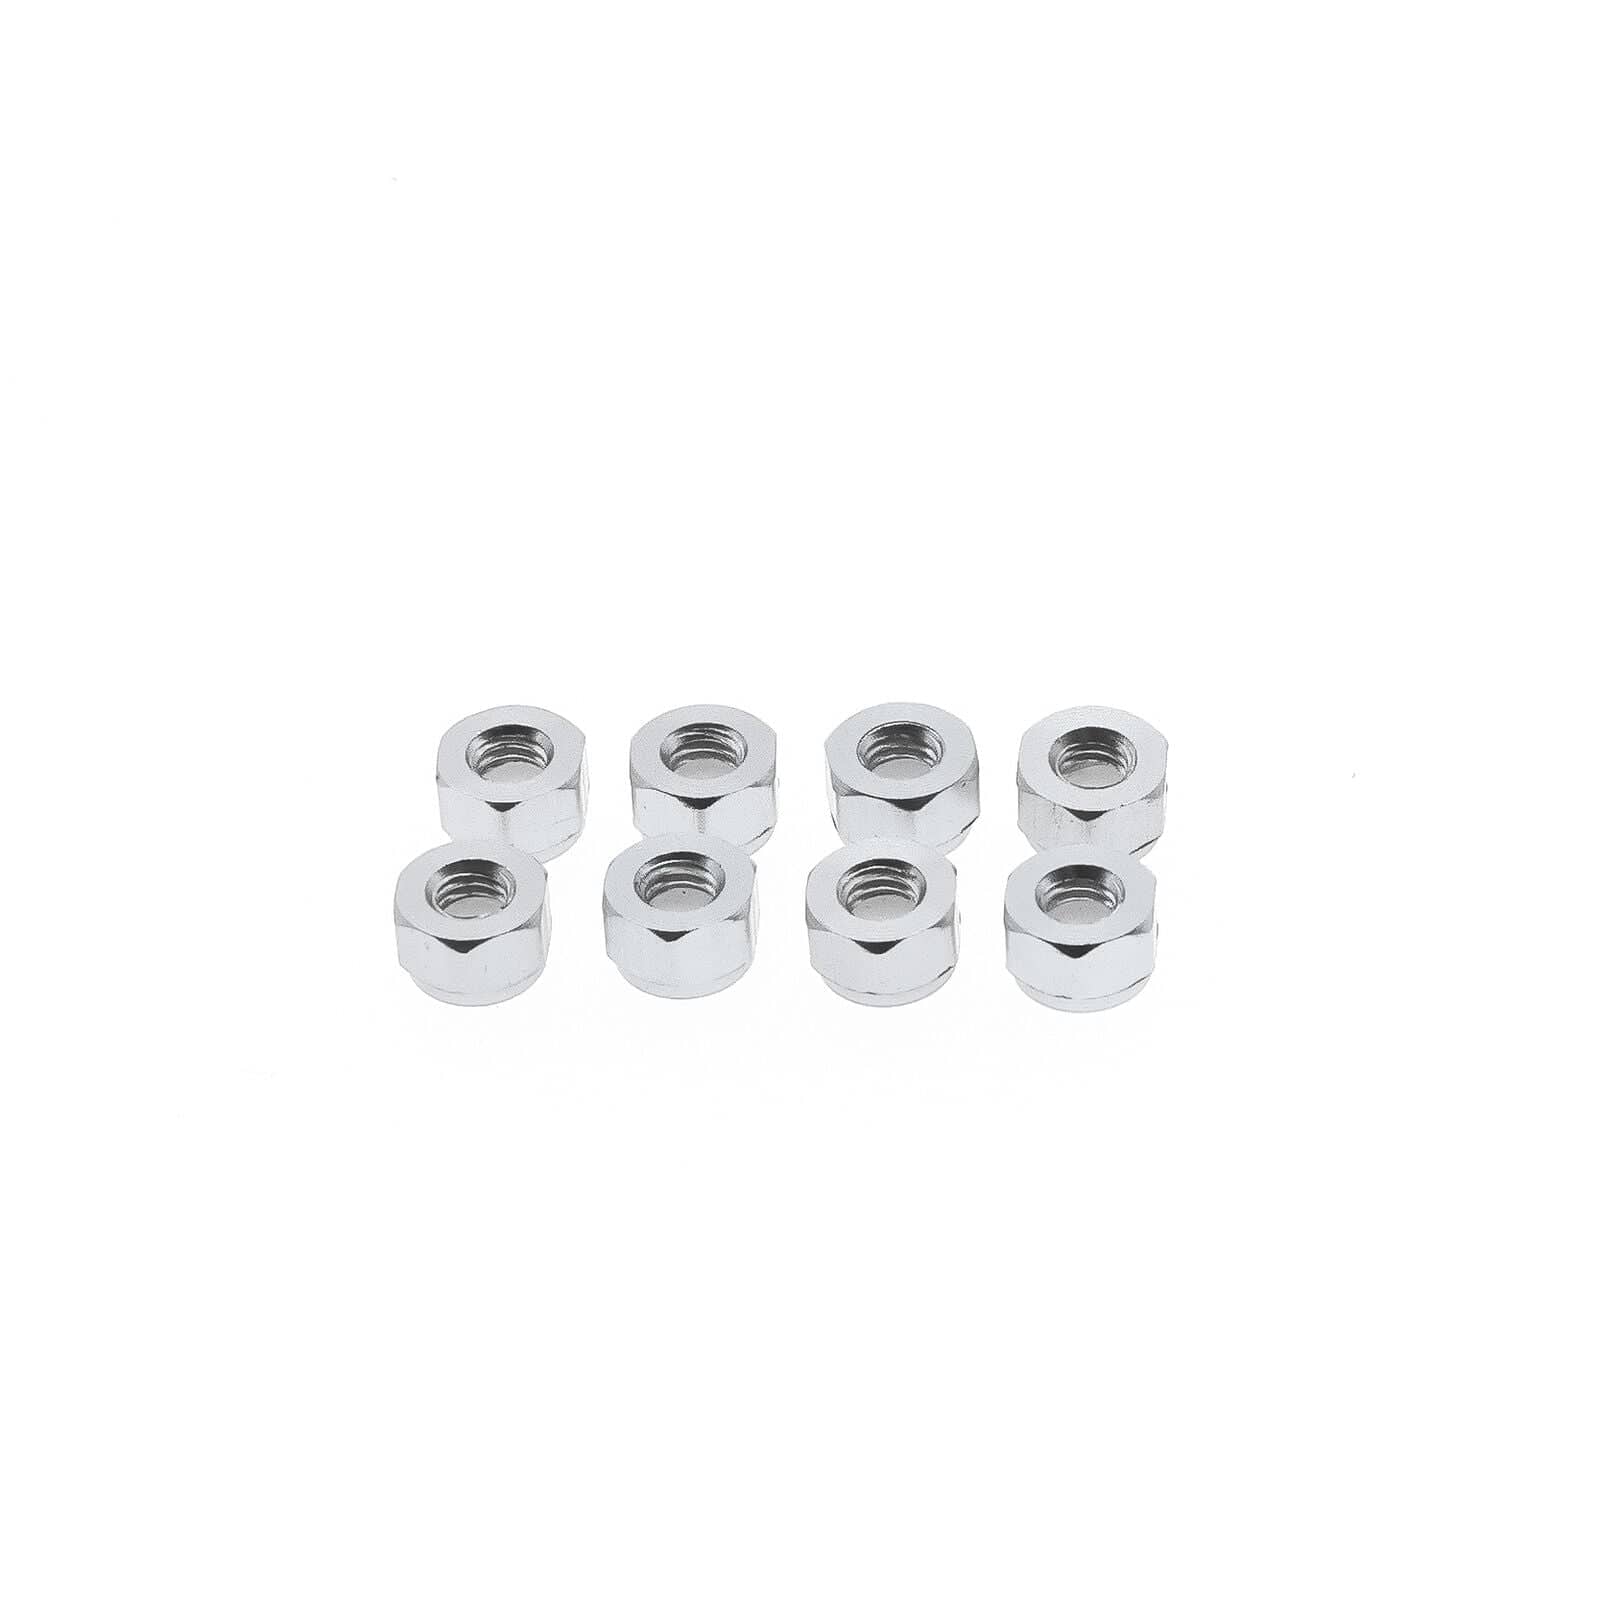 RCAWD ECX UPGRADE PARTS RCAWD M3 Wheel Hex Lock Nut Tire Nut ECX1059 For RC Hobby Car 1-10 ECX 2WD Series 8PCS